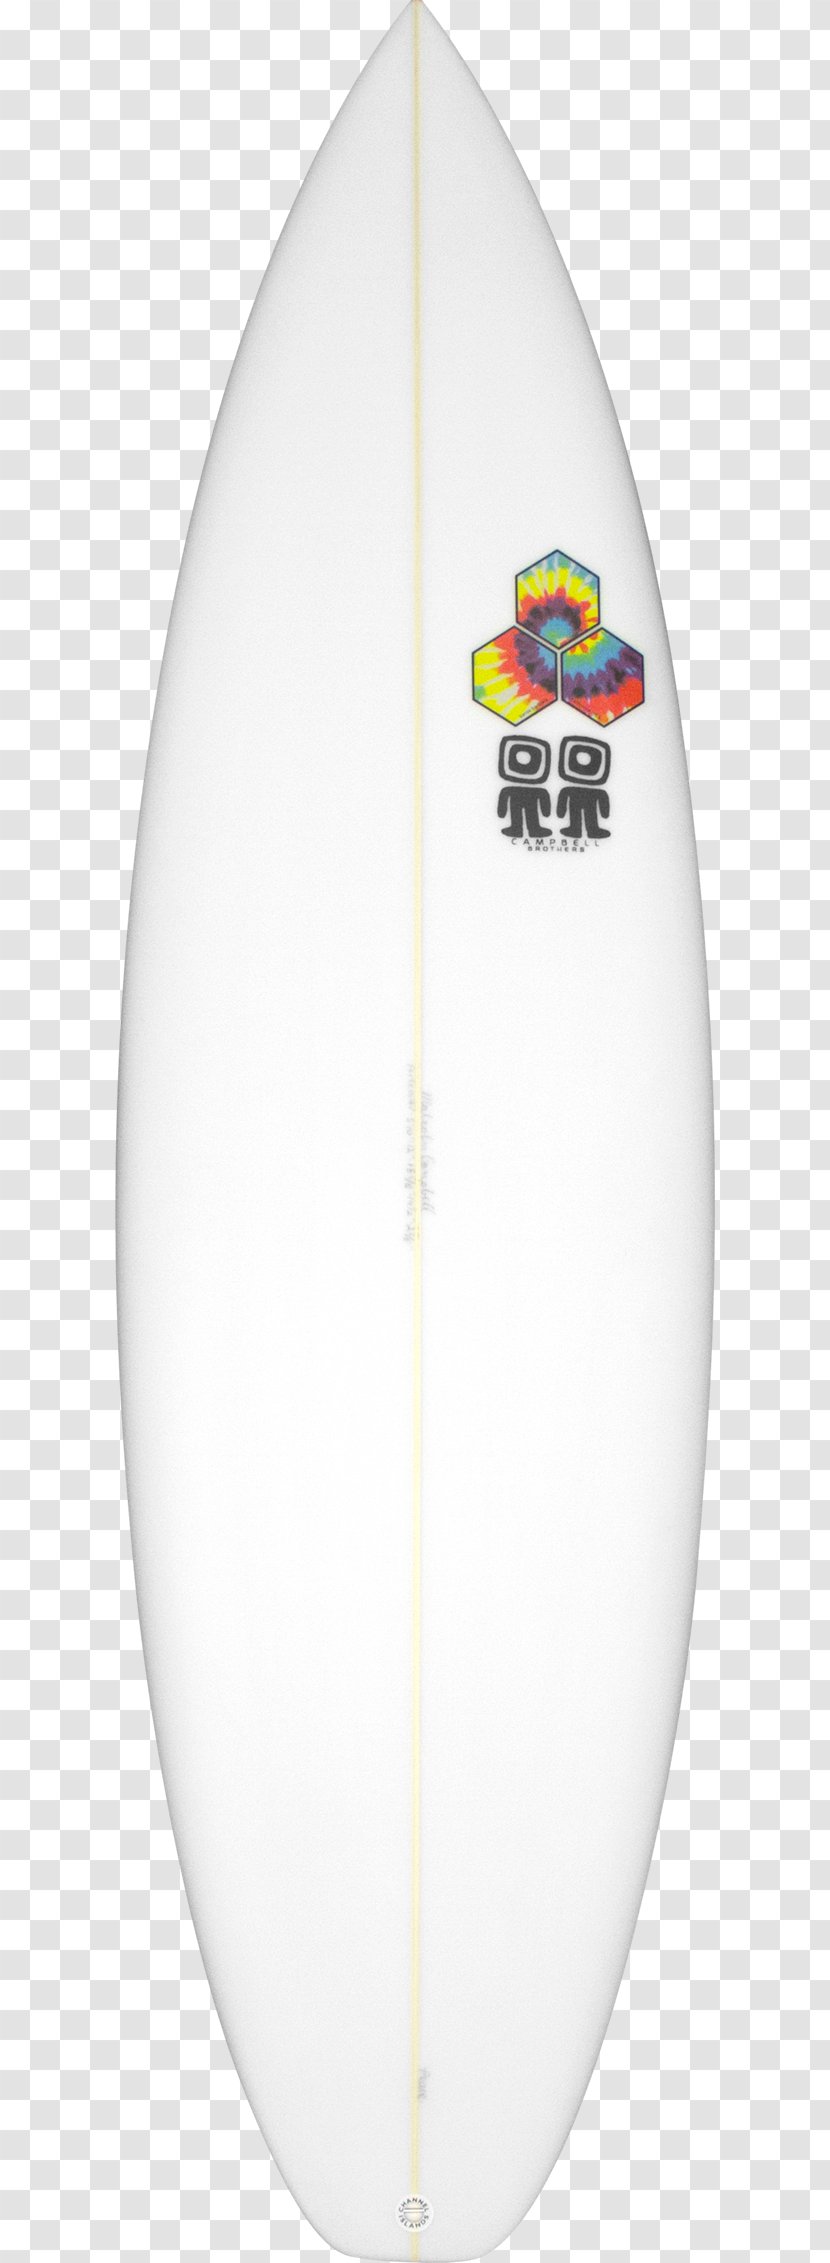 Campbell Brothers Surfboards - Surfing Equipment And Supplies - Surf Board Transparent PNG